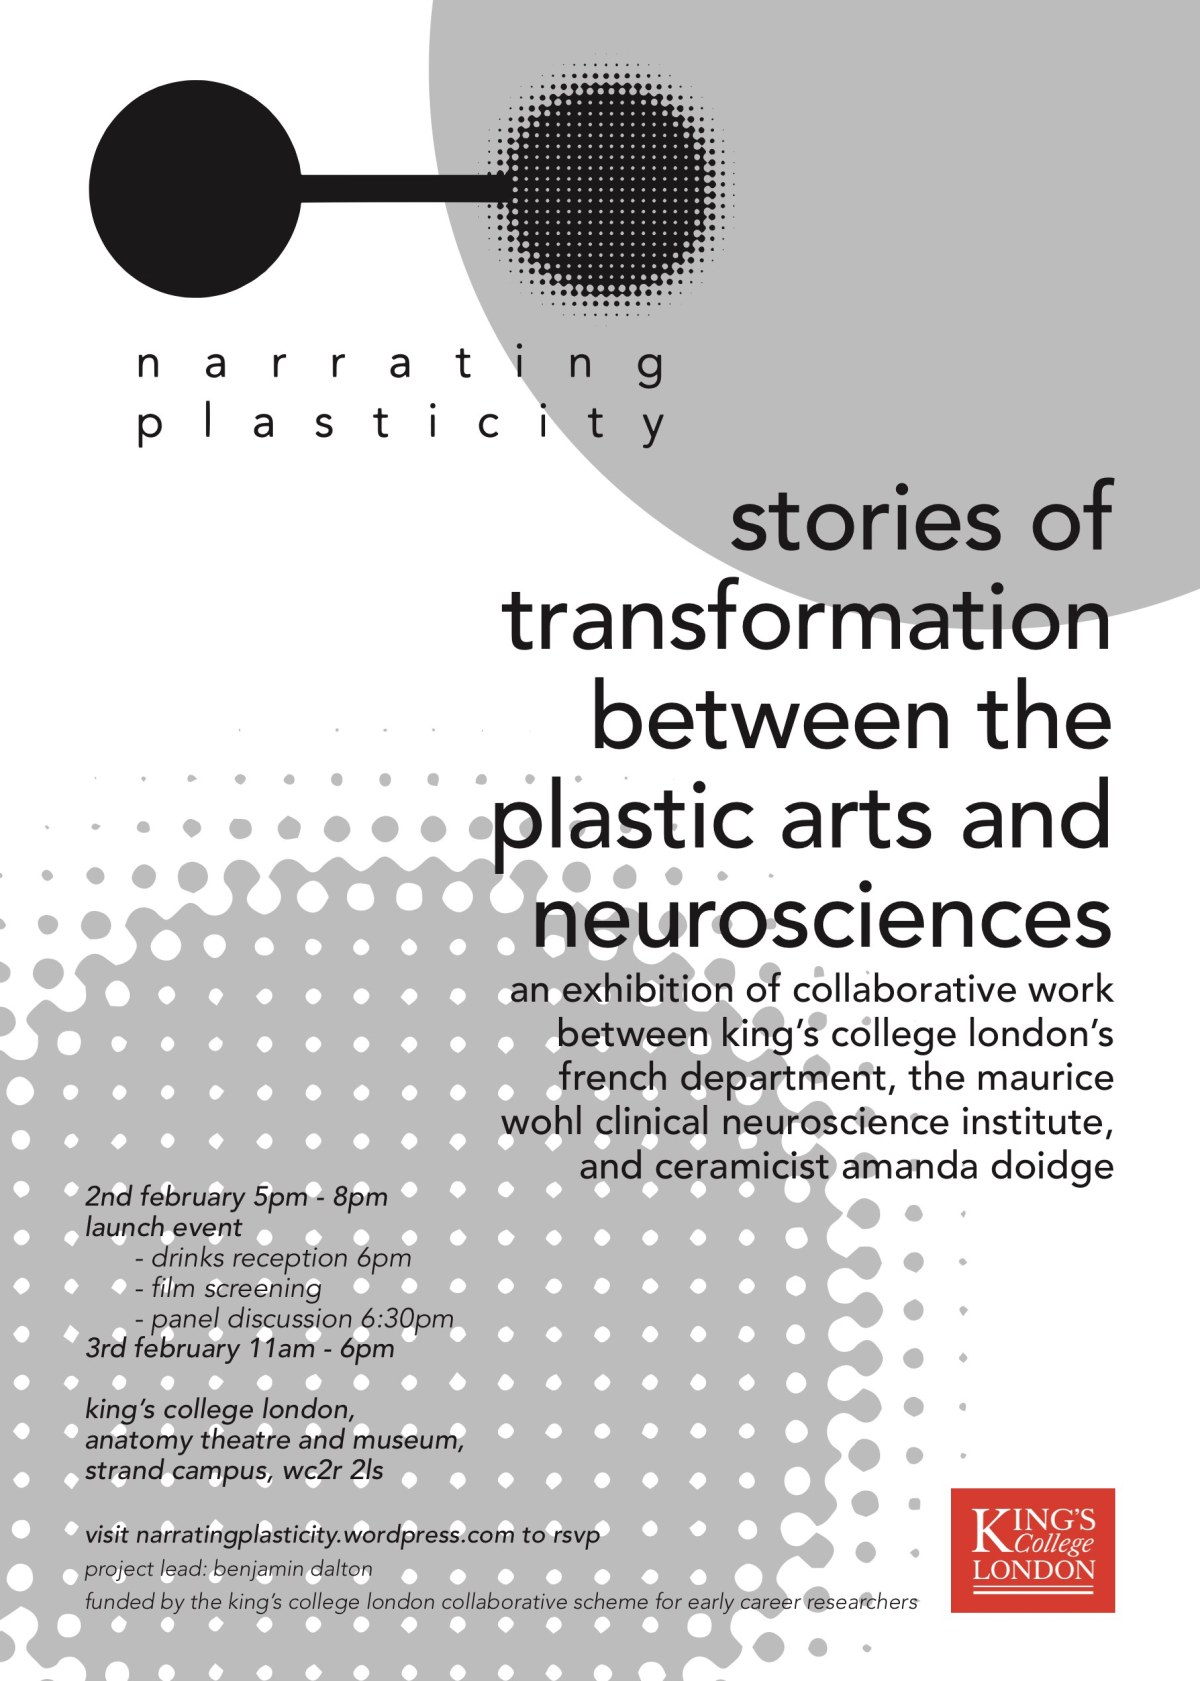 Come to the Narrating Plasticity Exhibition!